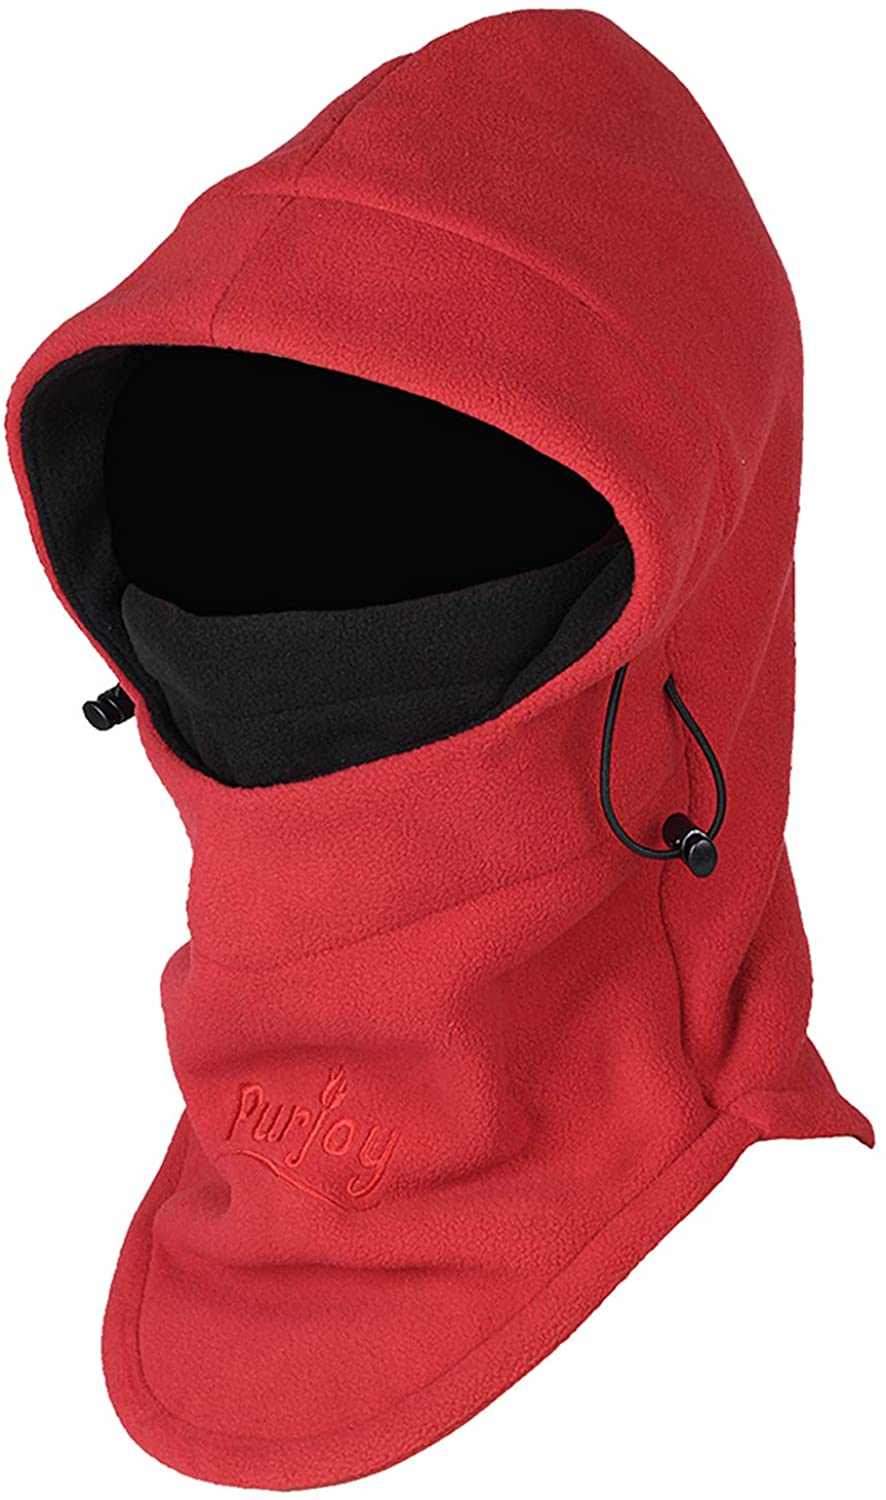 Multipurpose Use Thermal Fleece Hooded Balaclava Warm Ski Bike Wind Stopper Full Face Mask Neck Warmer for Winter Outdoor Activities 